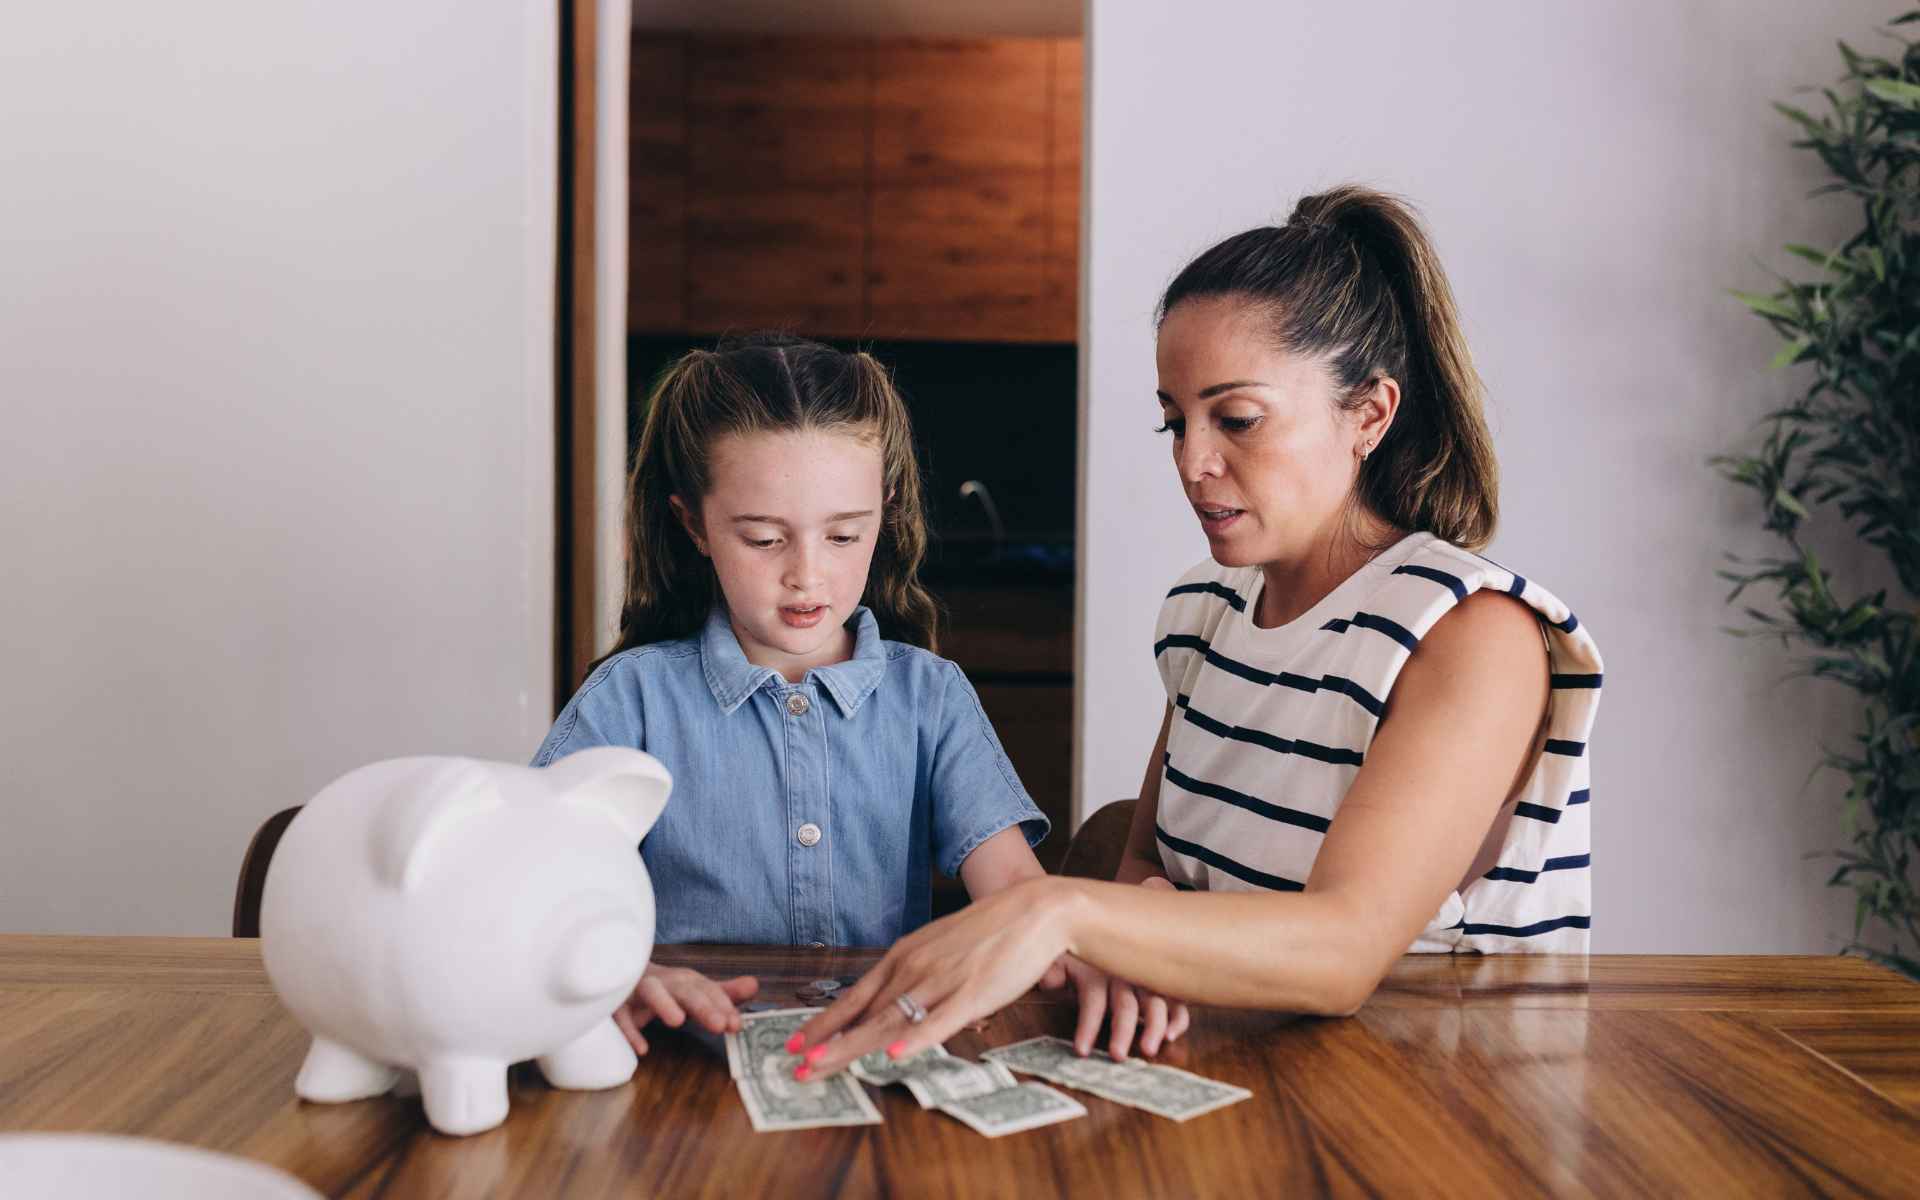 It’s Time To Address the Financial Literacy Problem